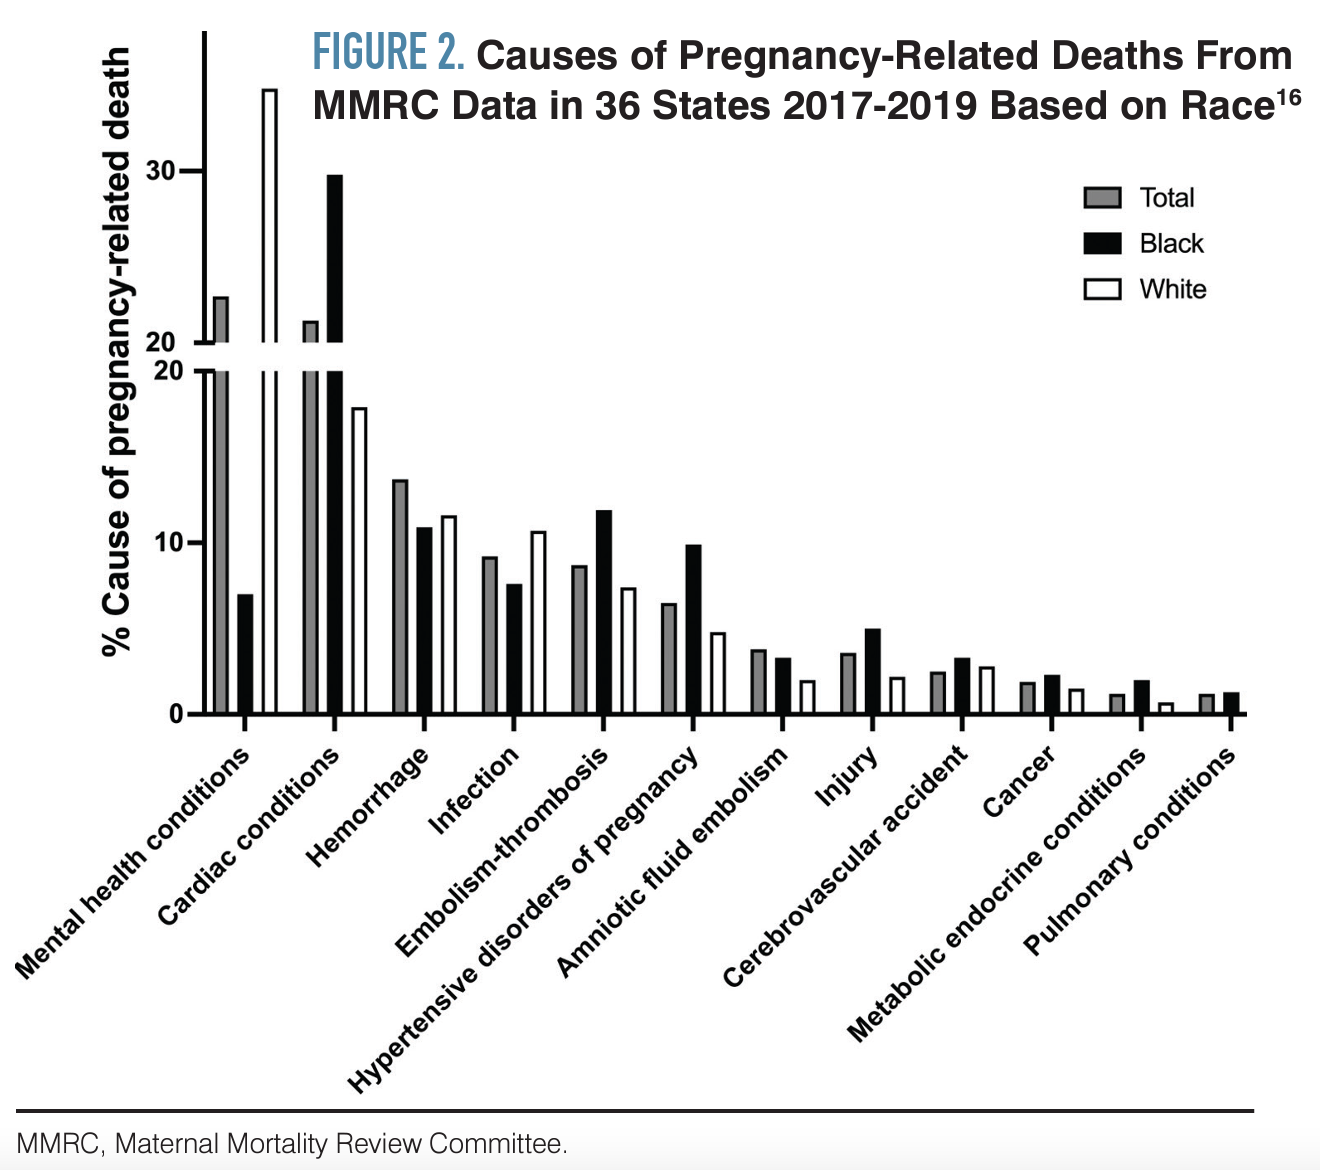 Causes of Pregnancy-Related Deaths From MMRC Data in 36 States 2017-2019 Based on Race